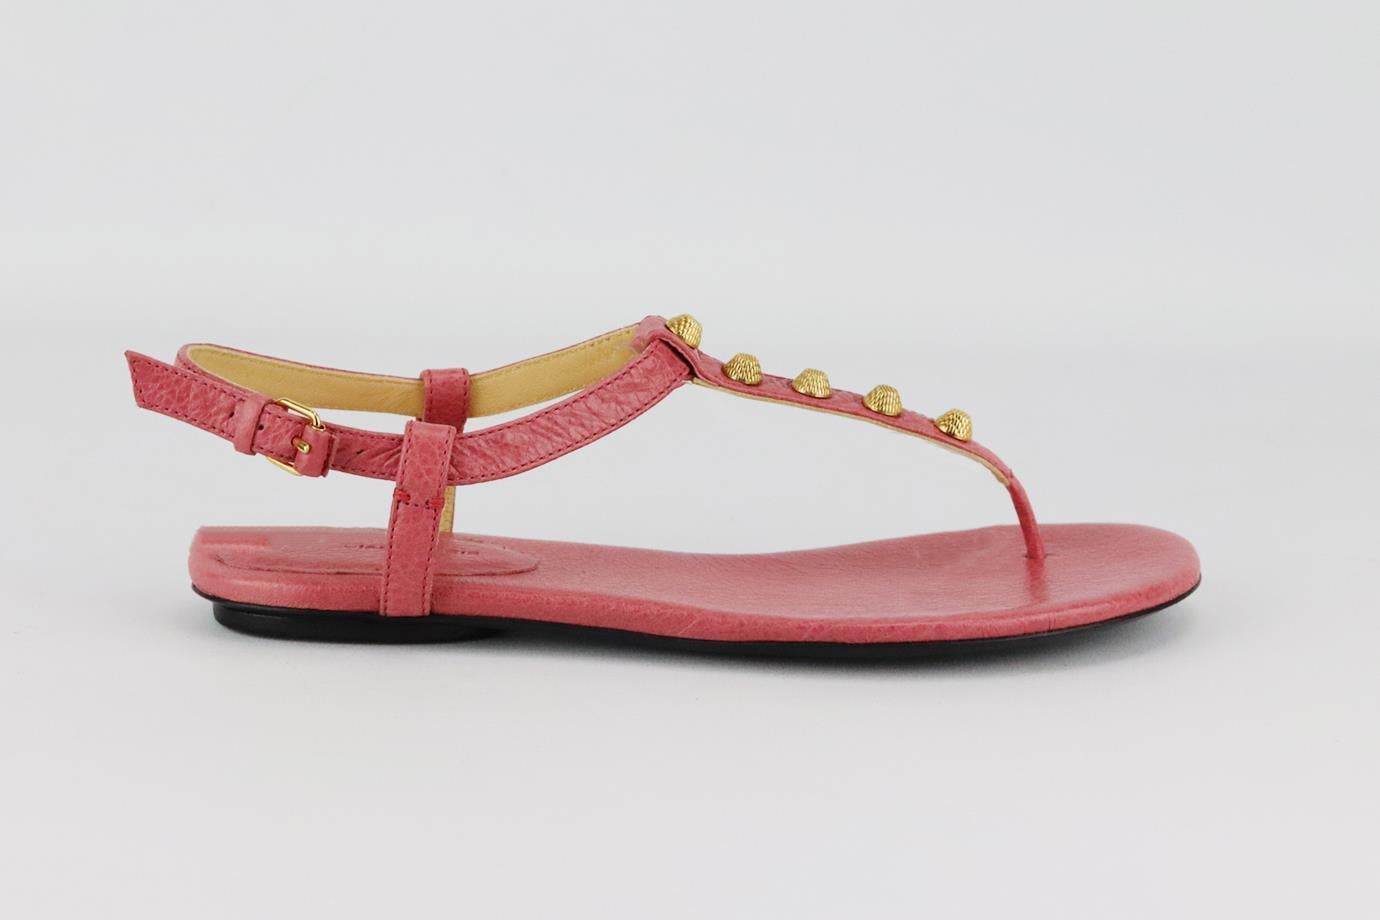 Balenciaga studded glossed leather sandals. Pink. Buckle fastening at side. Does not come with box or dustbag. Size: EU 38 (UK 5, US 8). Insole: 9.5 in. Heel: 0.5 in
